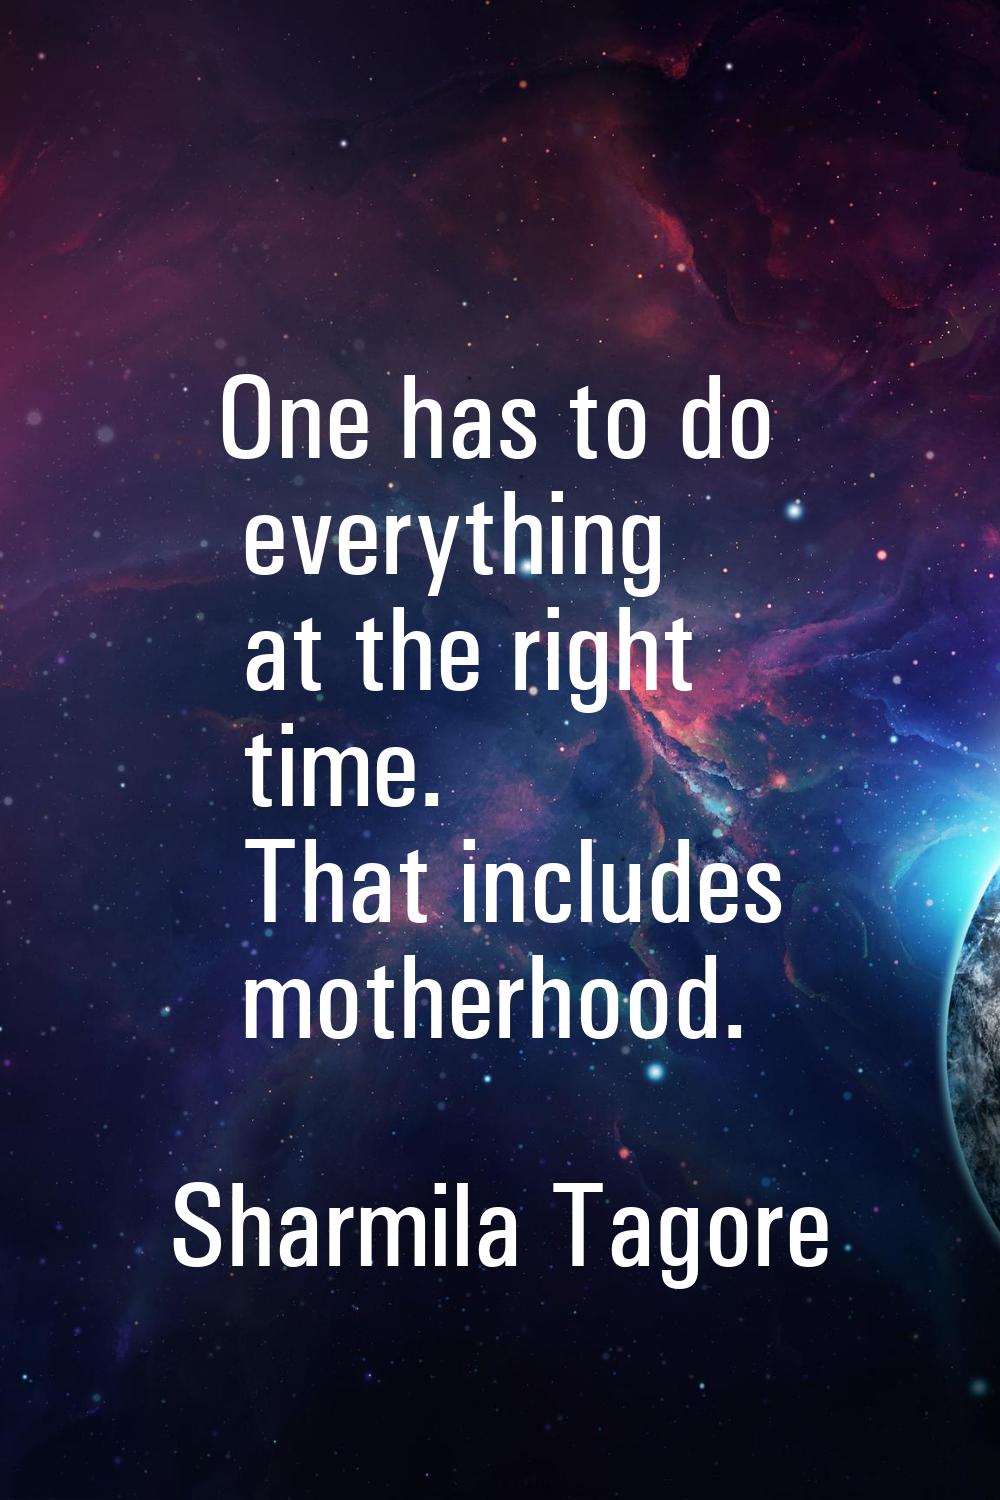 One has to do everything at the right time. That includes motherhood.